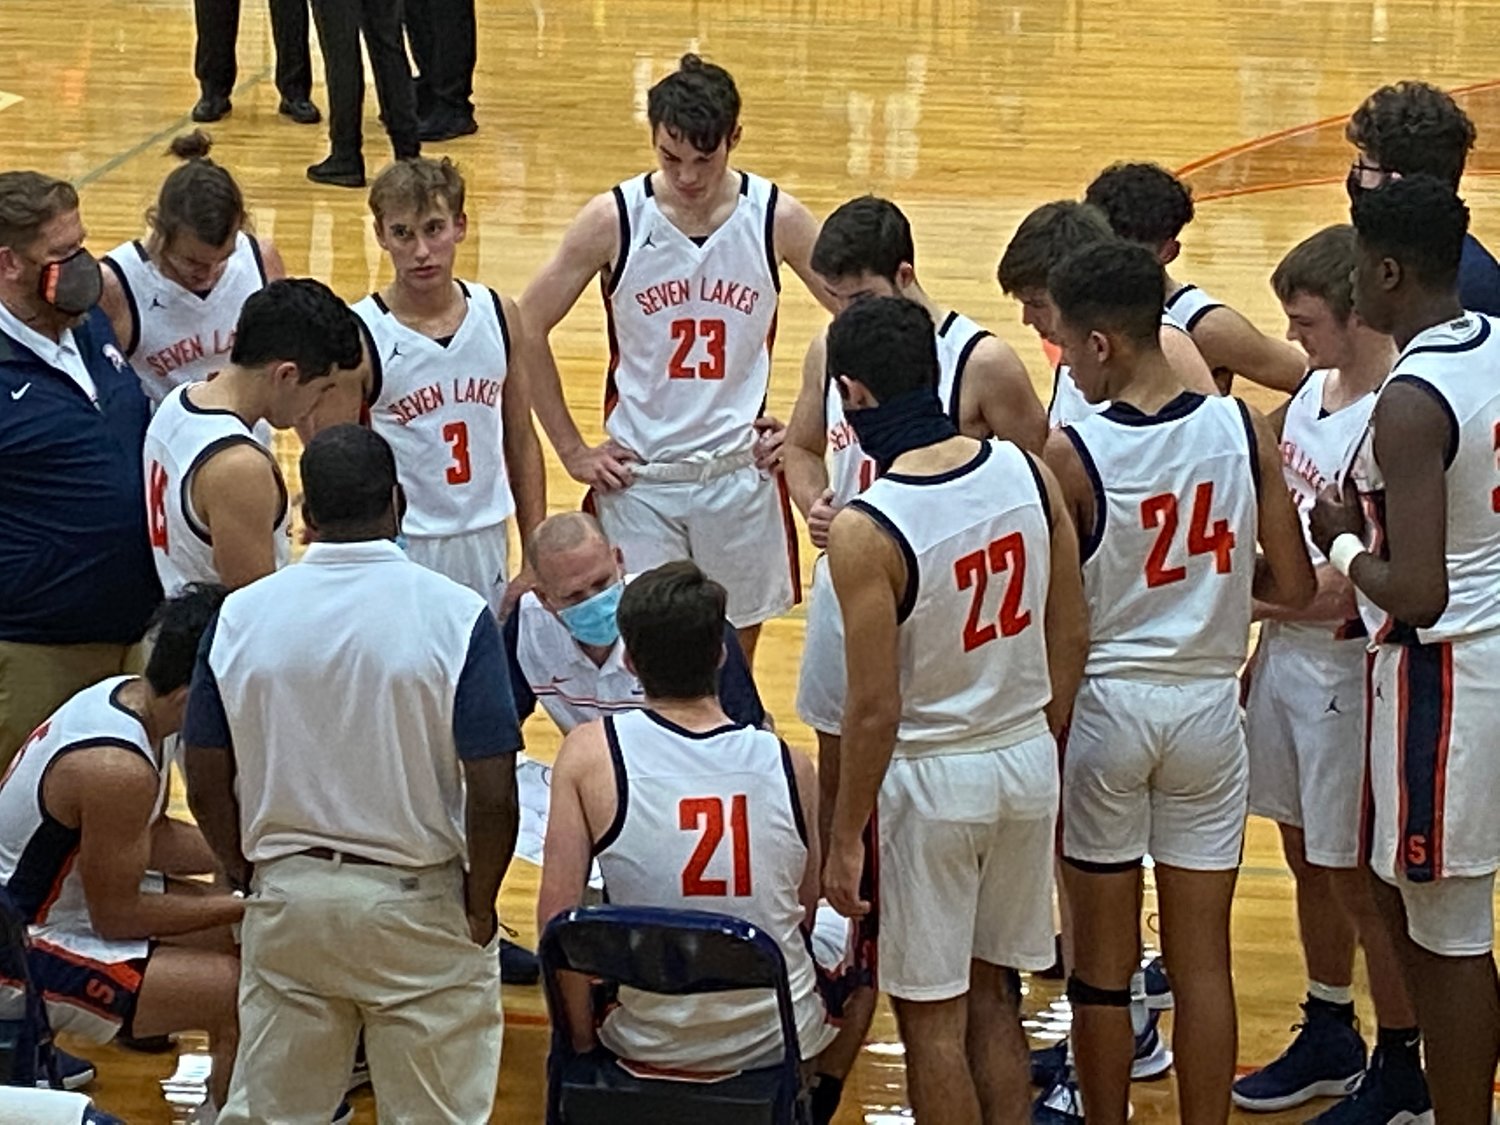 Seven Lakes boys basketball coach Shannon Heston, kneeling in the mask, talks to his players during a timeout during a game against Taylor on Jan. 12 at Seven Lakes High.